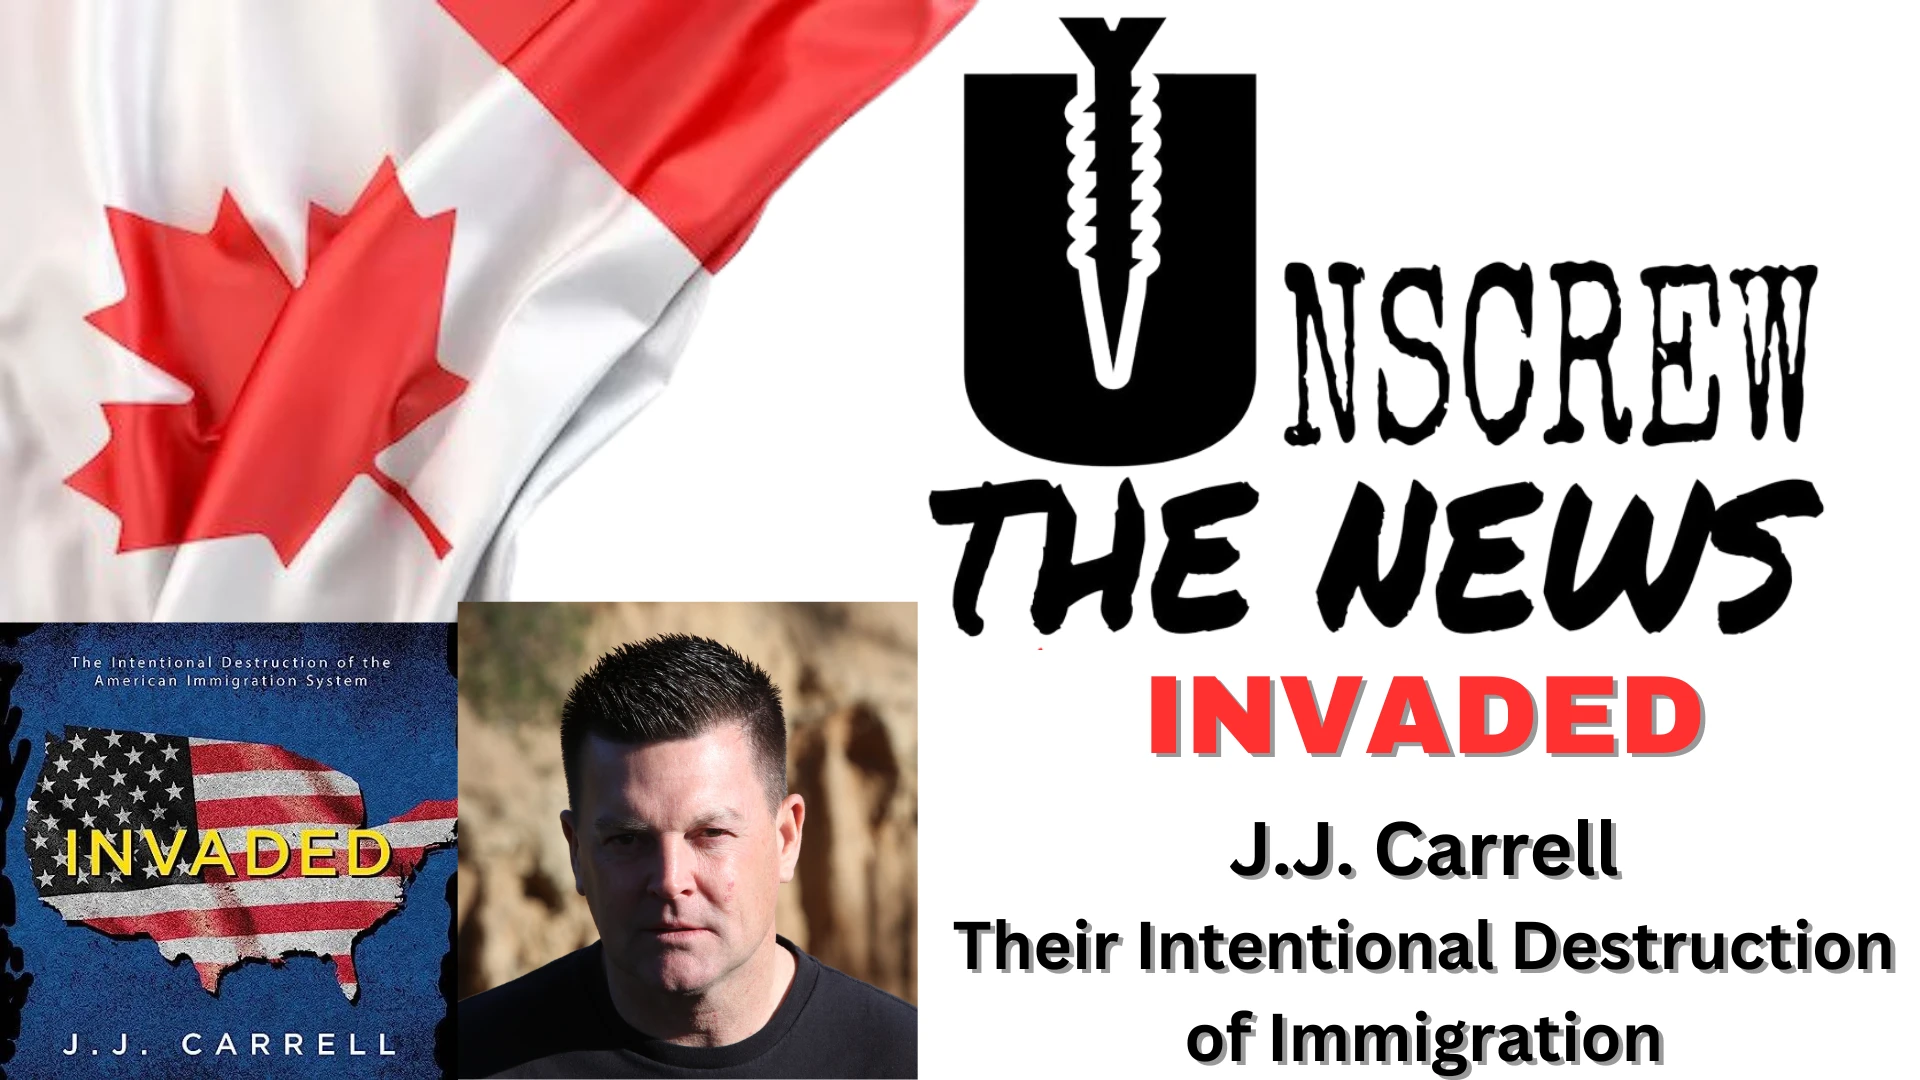 INVADED | Their Intentional Destruction of Immigration. JJ Carrell